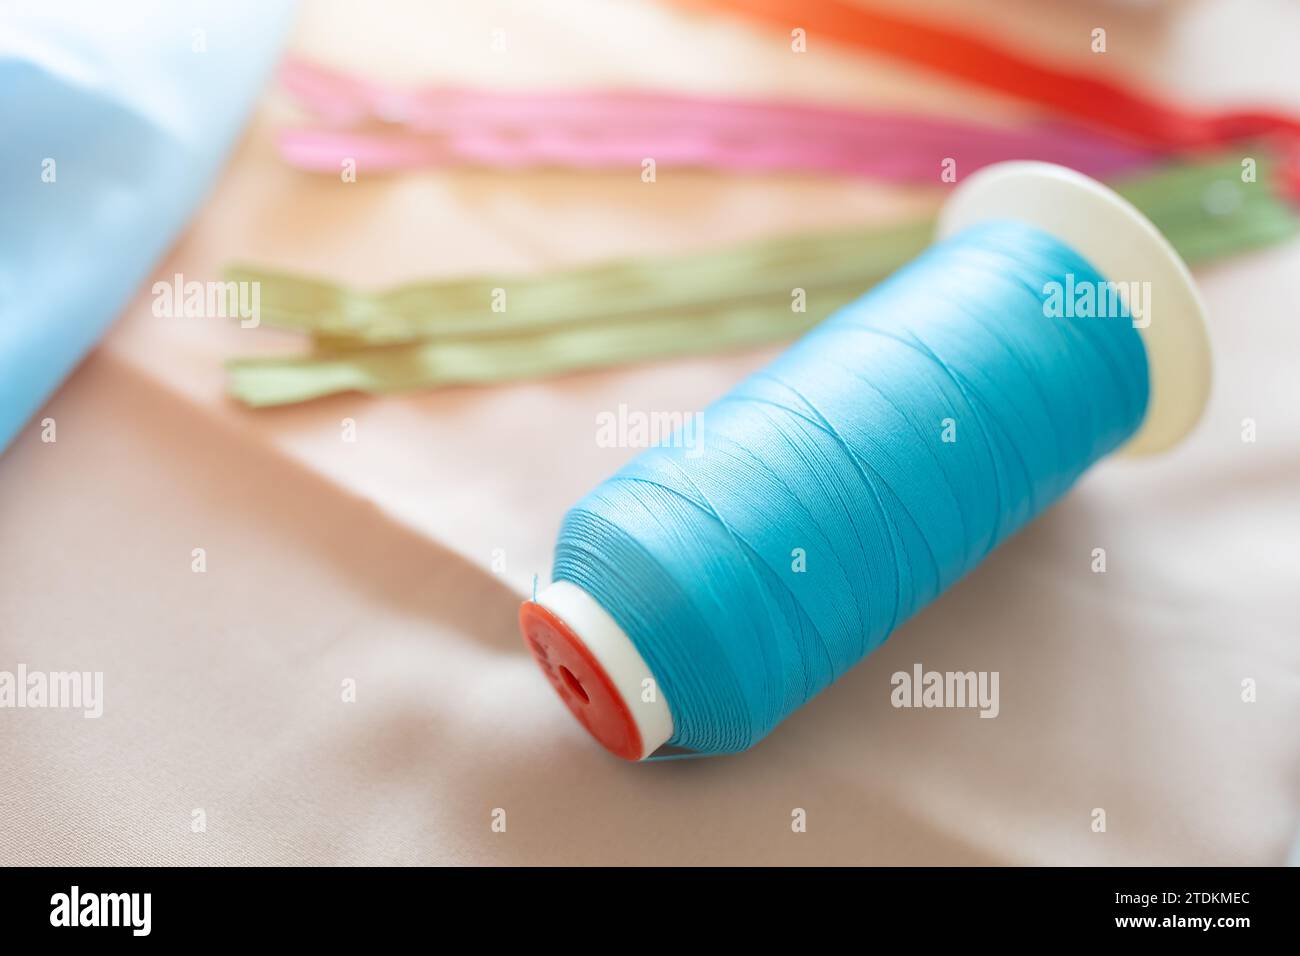 Thread spools for weaving in automatic sewing machines in Tailor colorful industrial clothing material. Stock Photo